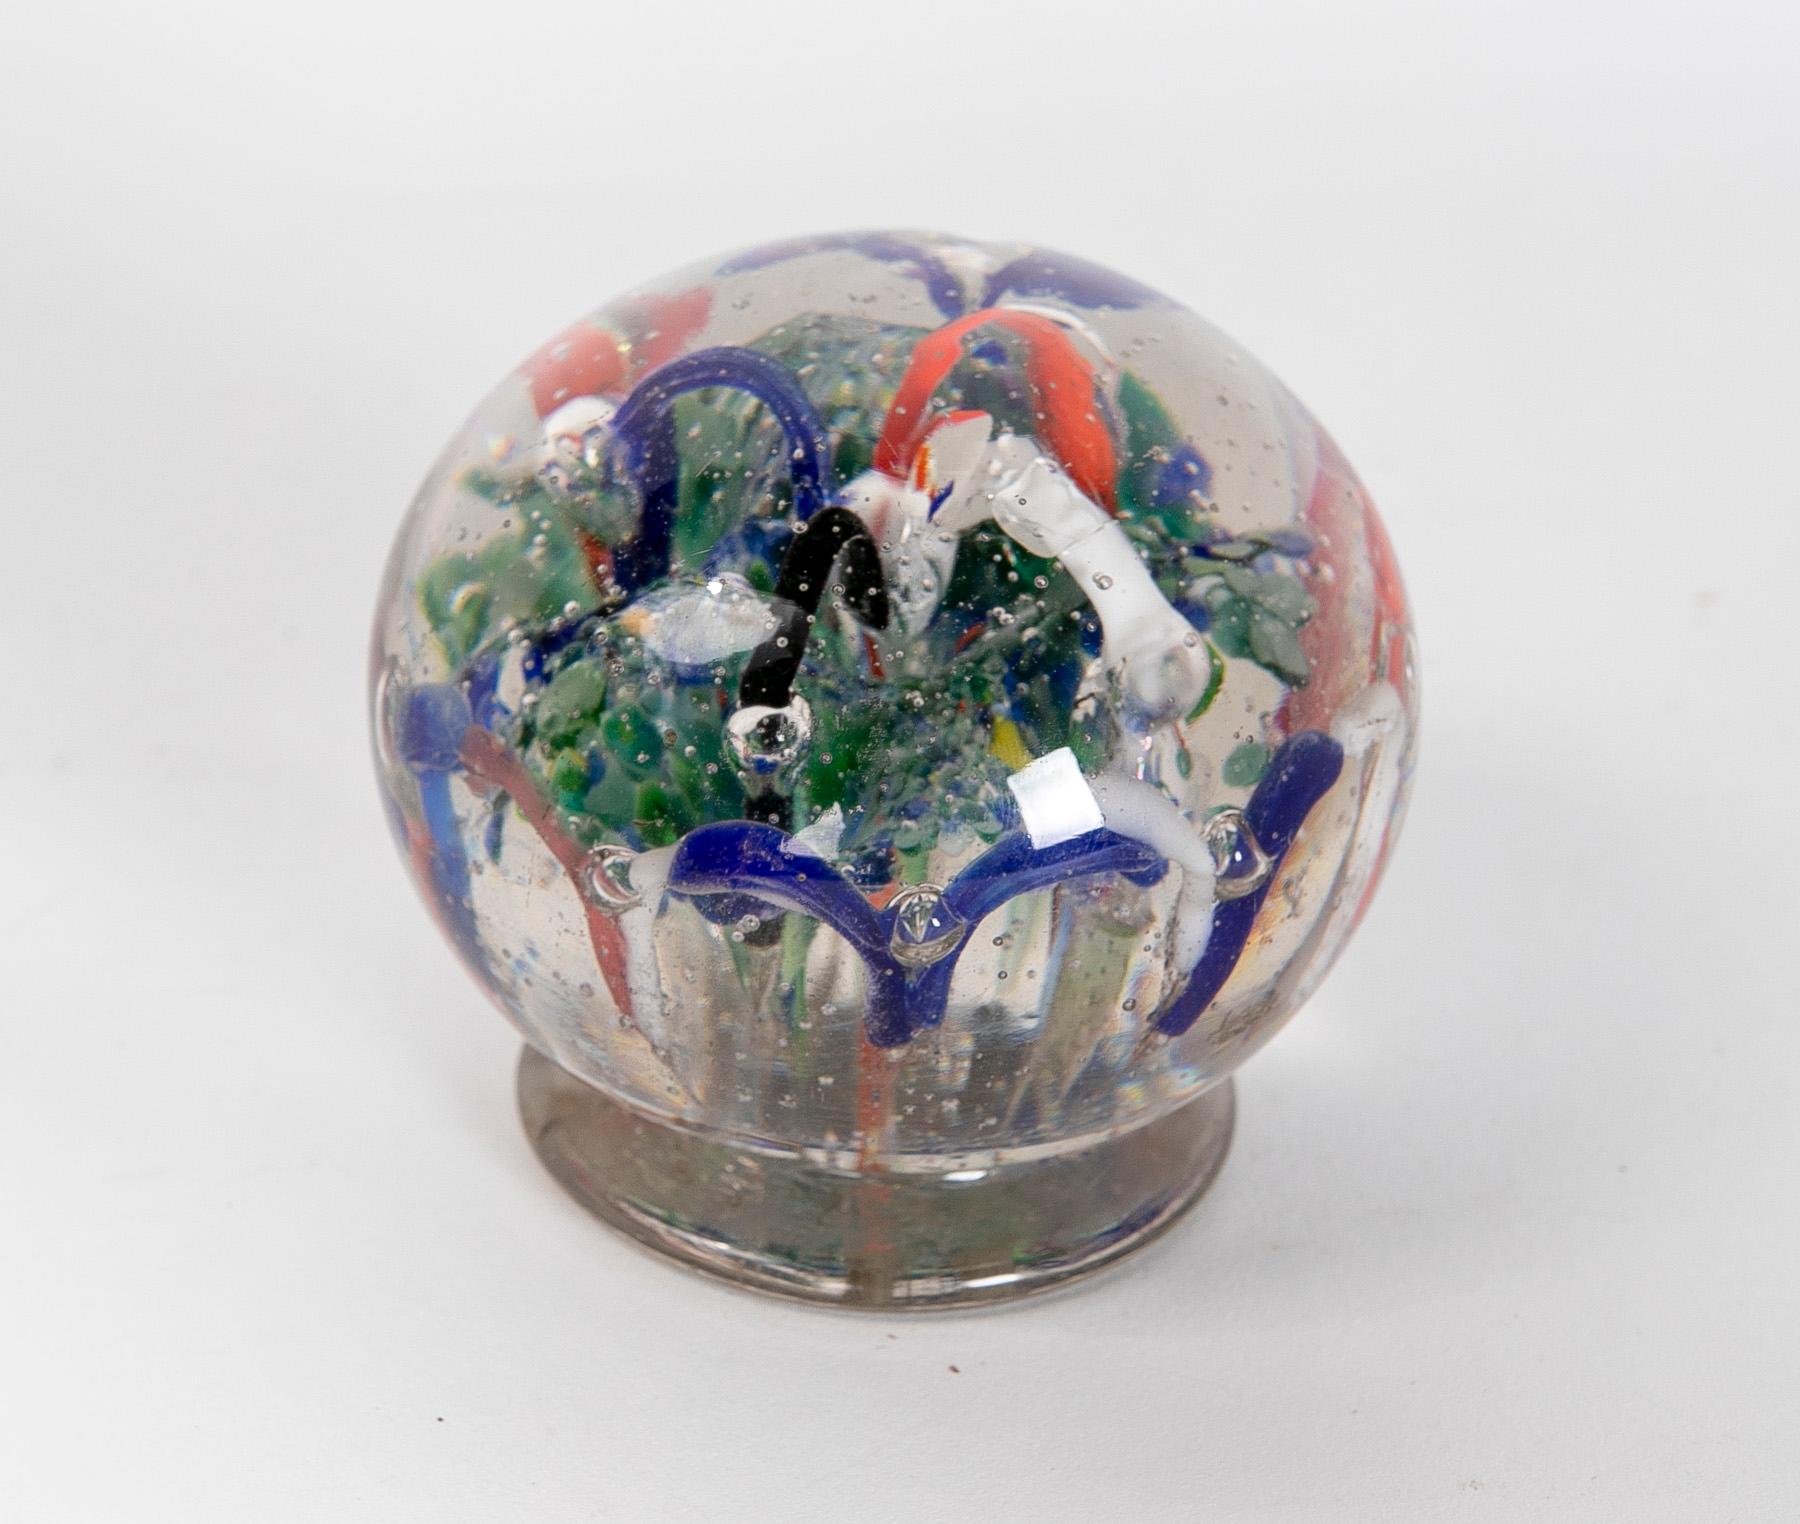 1950s Crystal Paperweight with different colors Decoration and base.